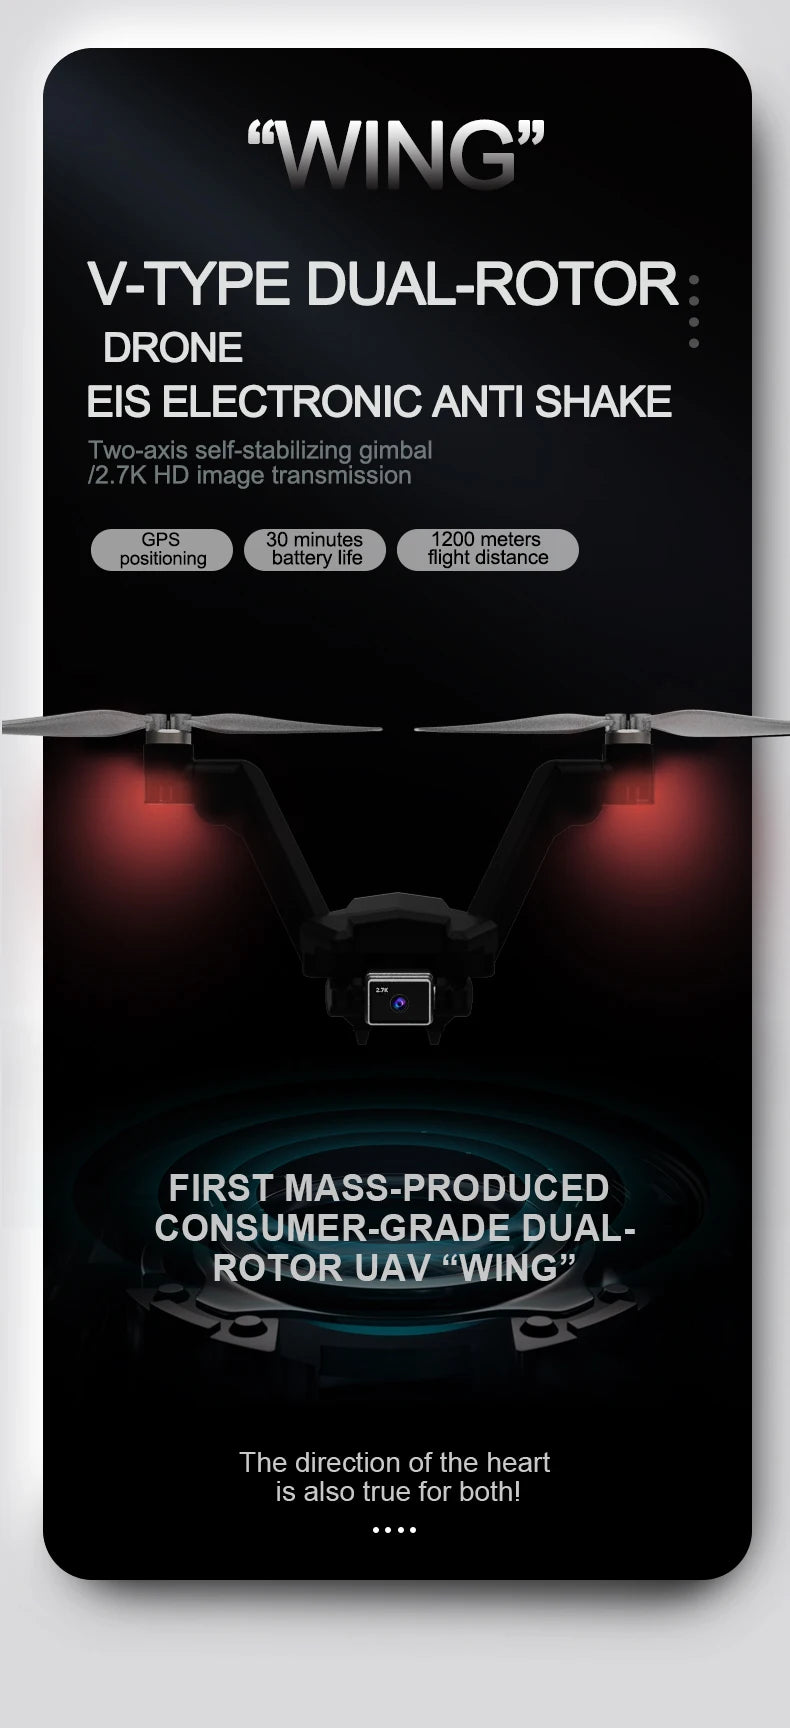 New L100 GPS V-type Drone, DRONE EIS ELECTRONIC ANTI SHAKE Two-axis